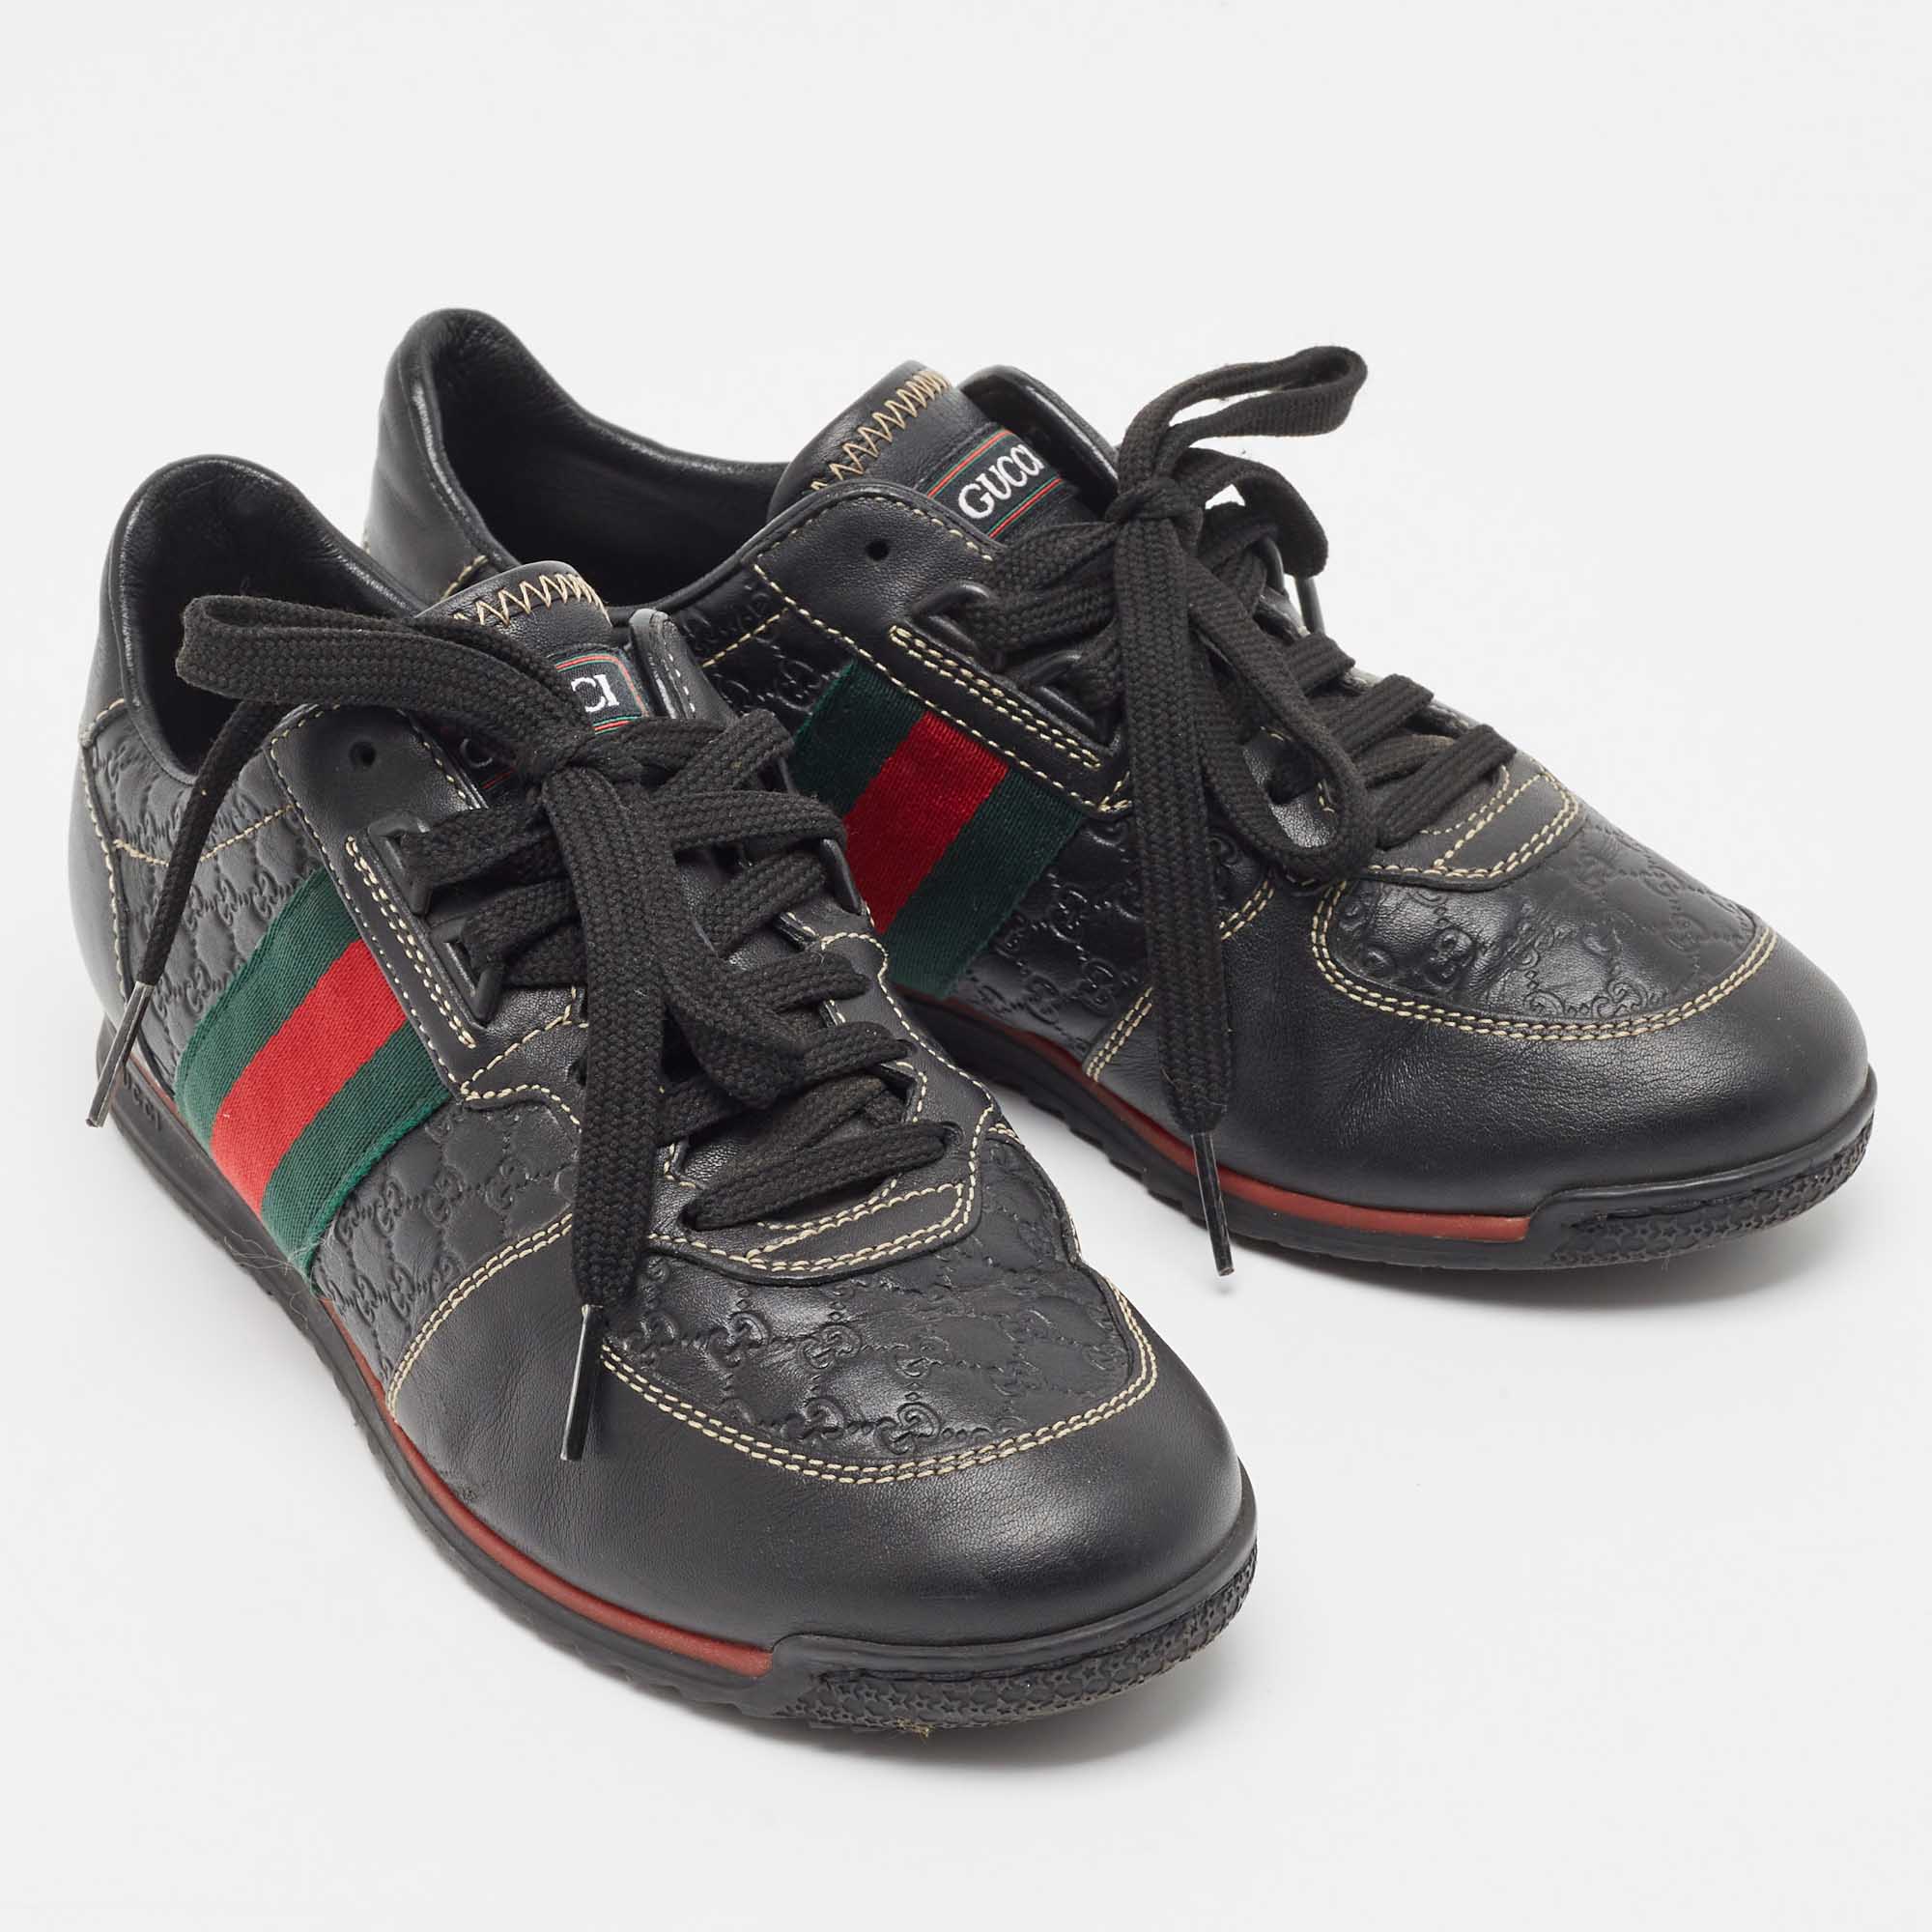 Gucci Black Guccissima Leather Web Low Top Sneakers Size 36.5